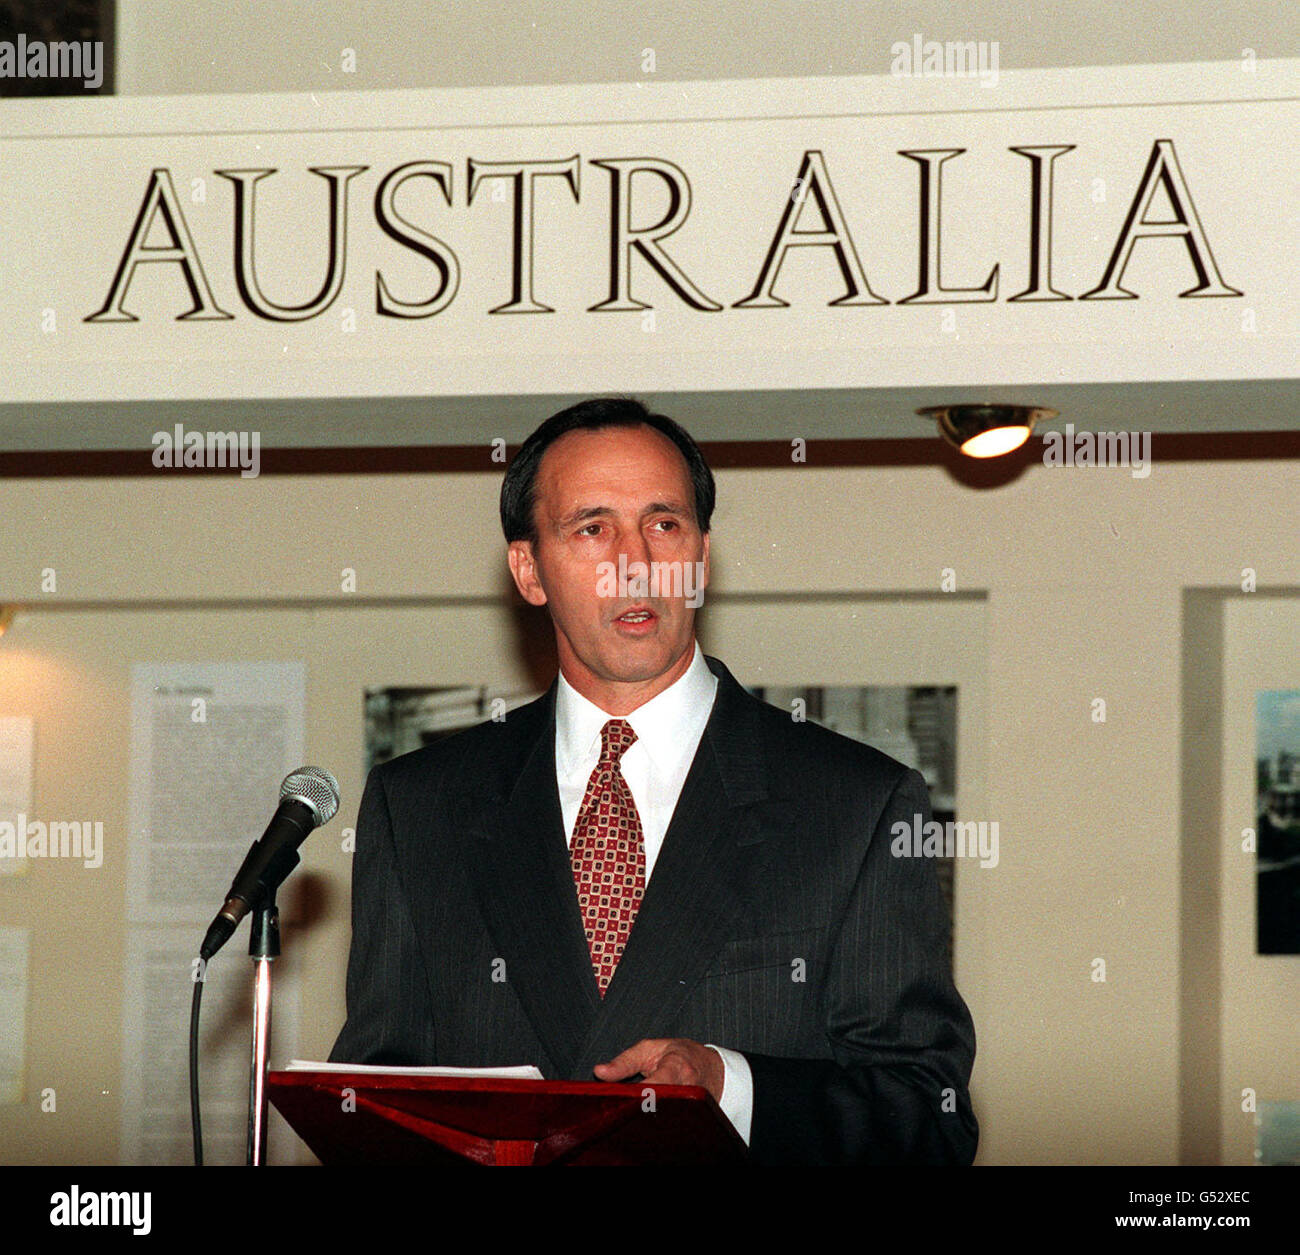 PAUL KEATING 1993: Australian Prime Minister Paul Keating during his speech at Australia House in London which marked the building's 75th anniversary. Stock Photo